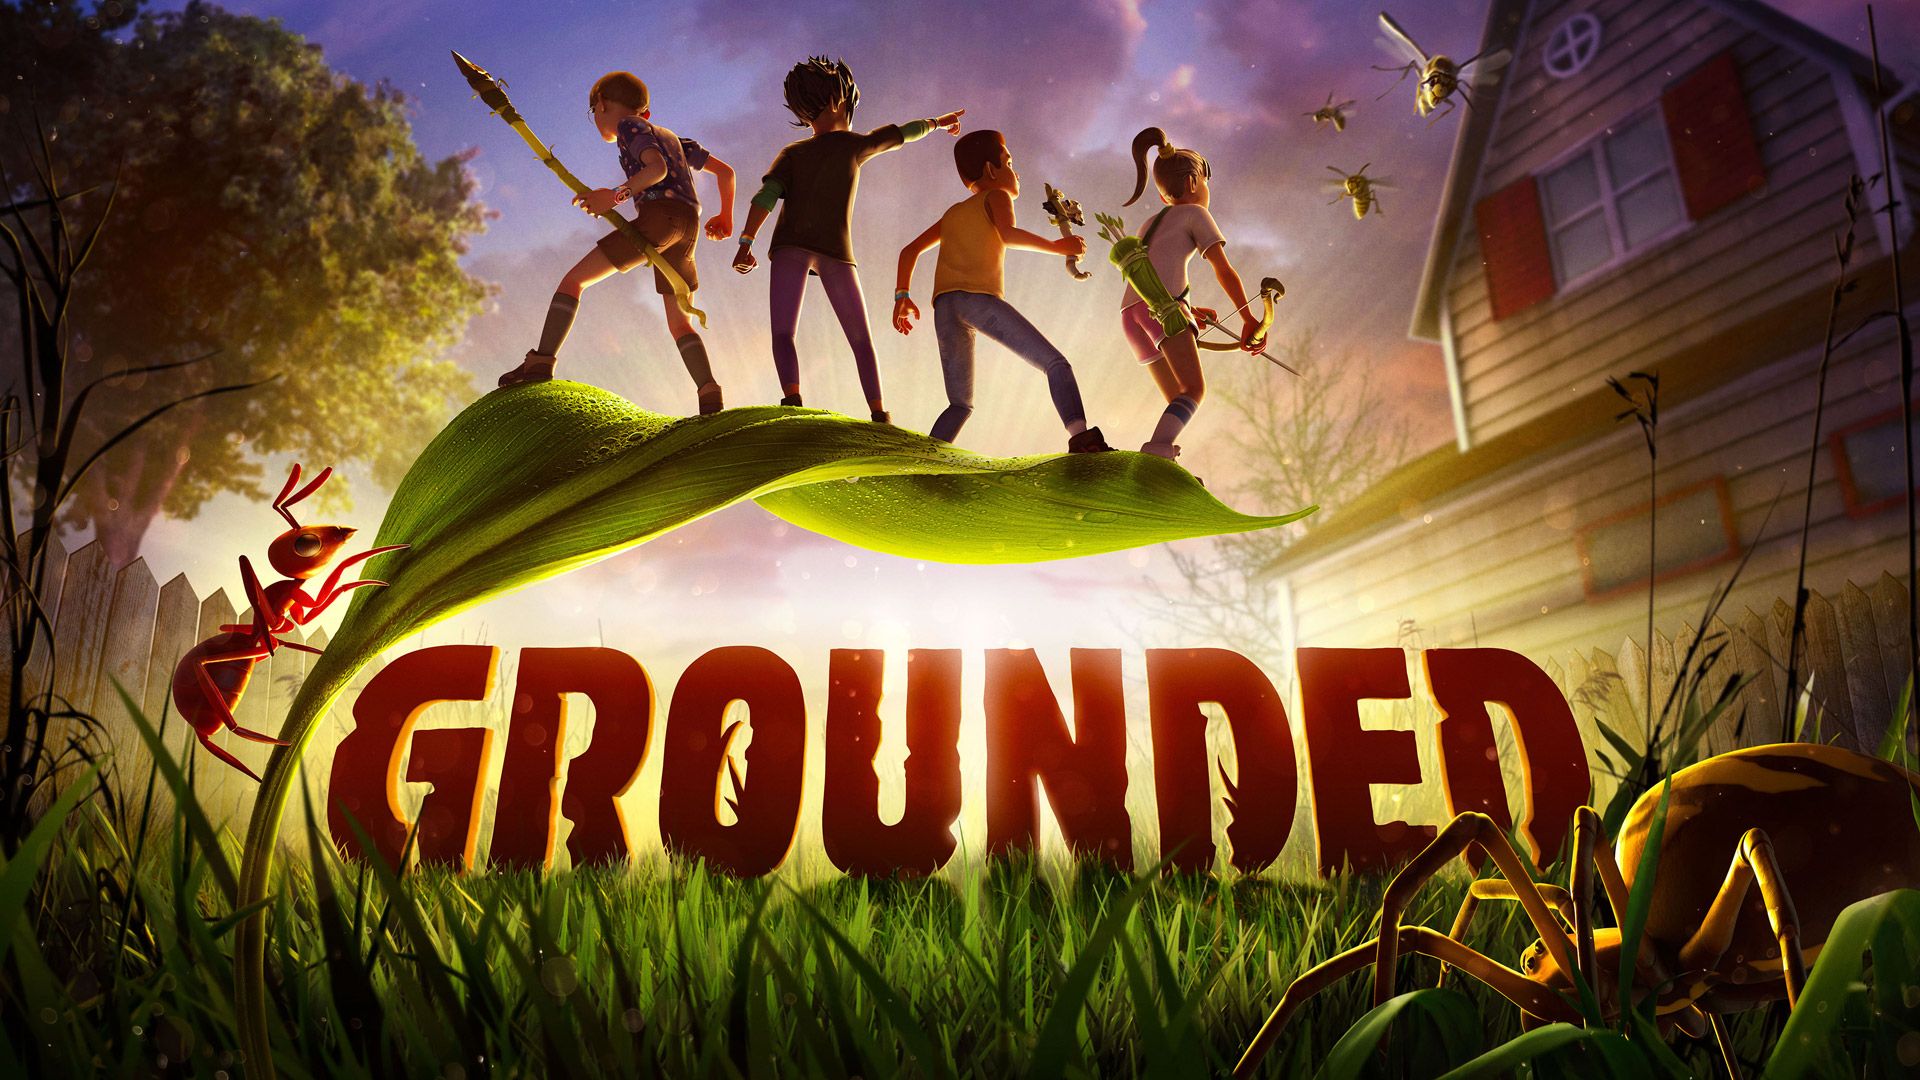 Free Grounded Wallpaper in 1920x1080